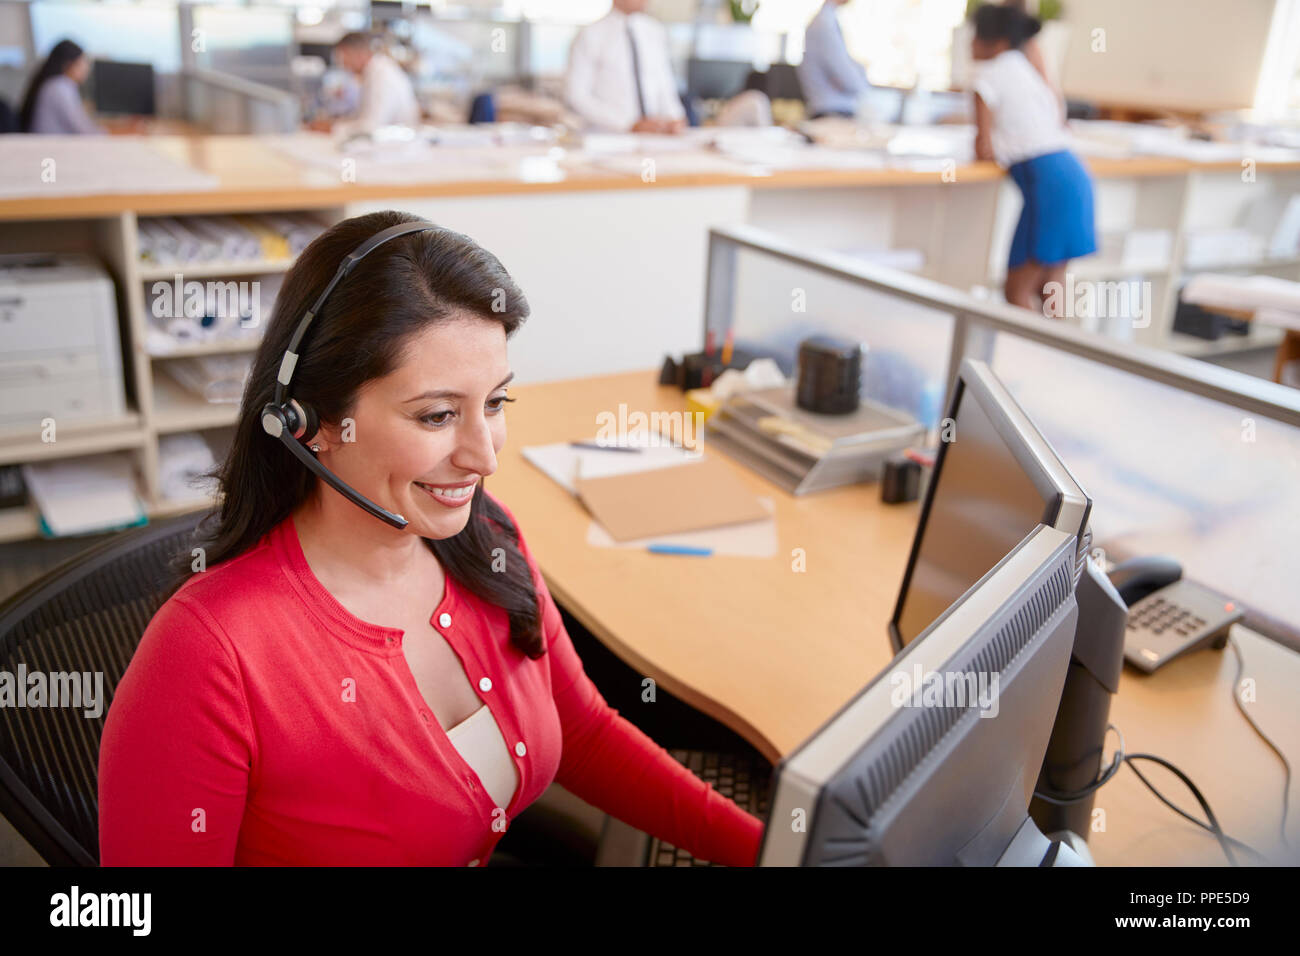 Hispanic woman working in a call centre, elevated view Stock Photo